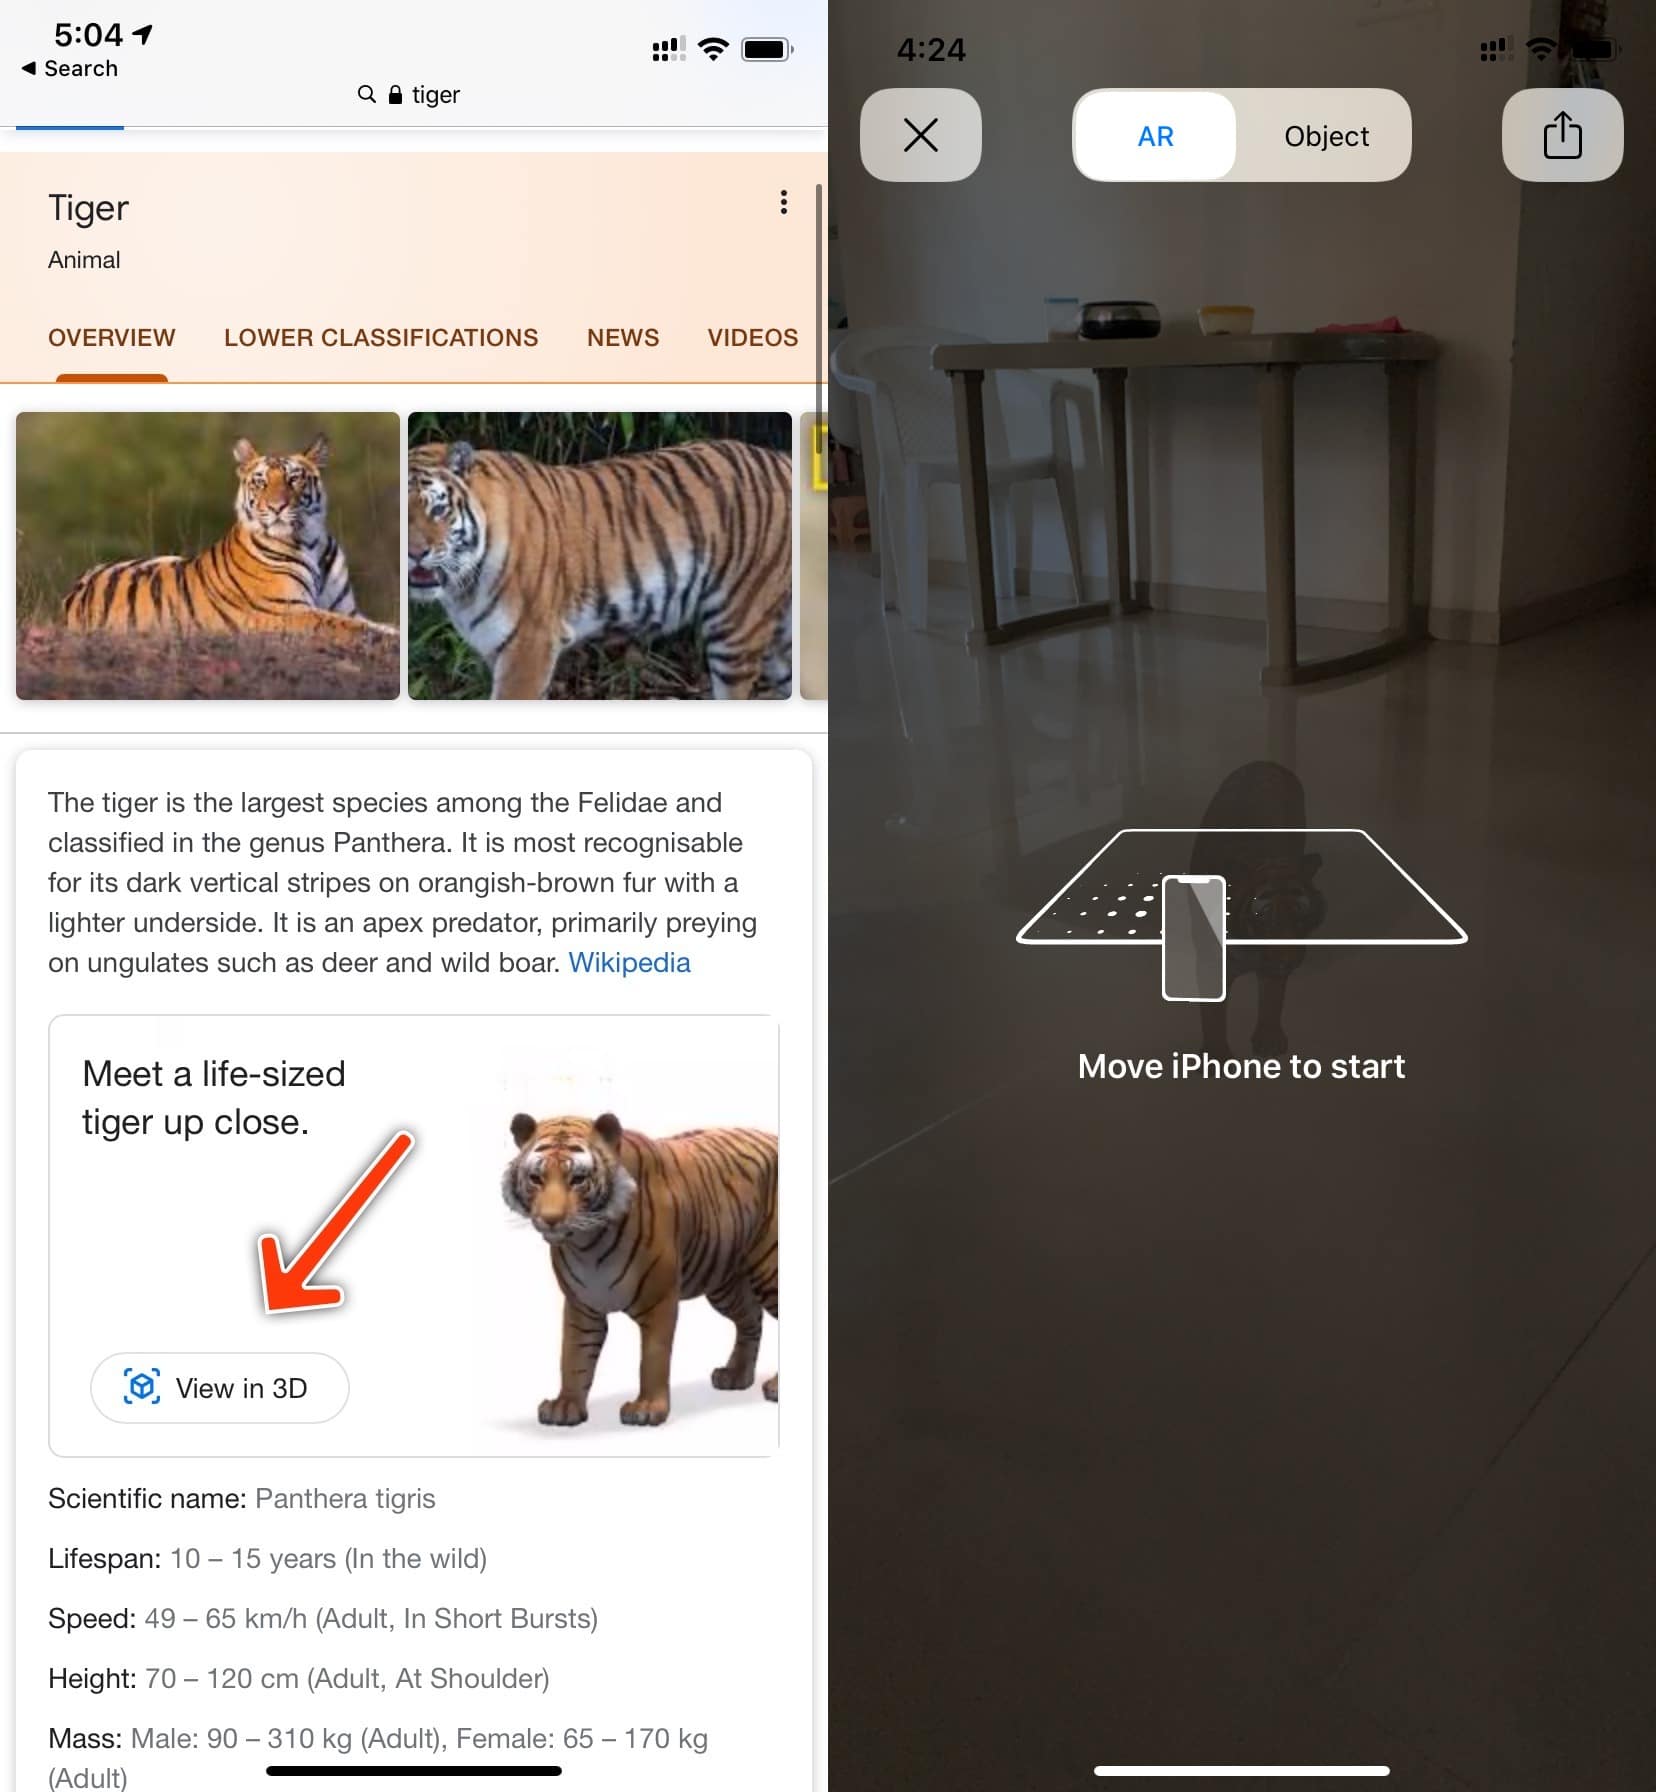 How To Add Realistic 3d Animals To Your Room Using Your Iphone Geek Tech Online